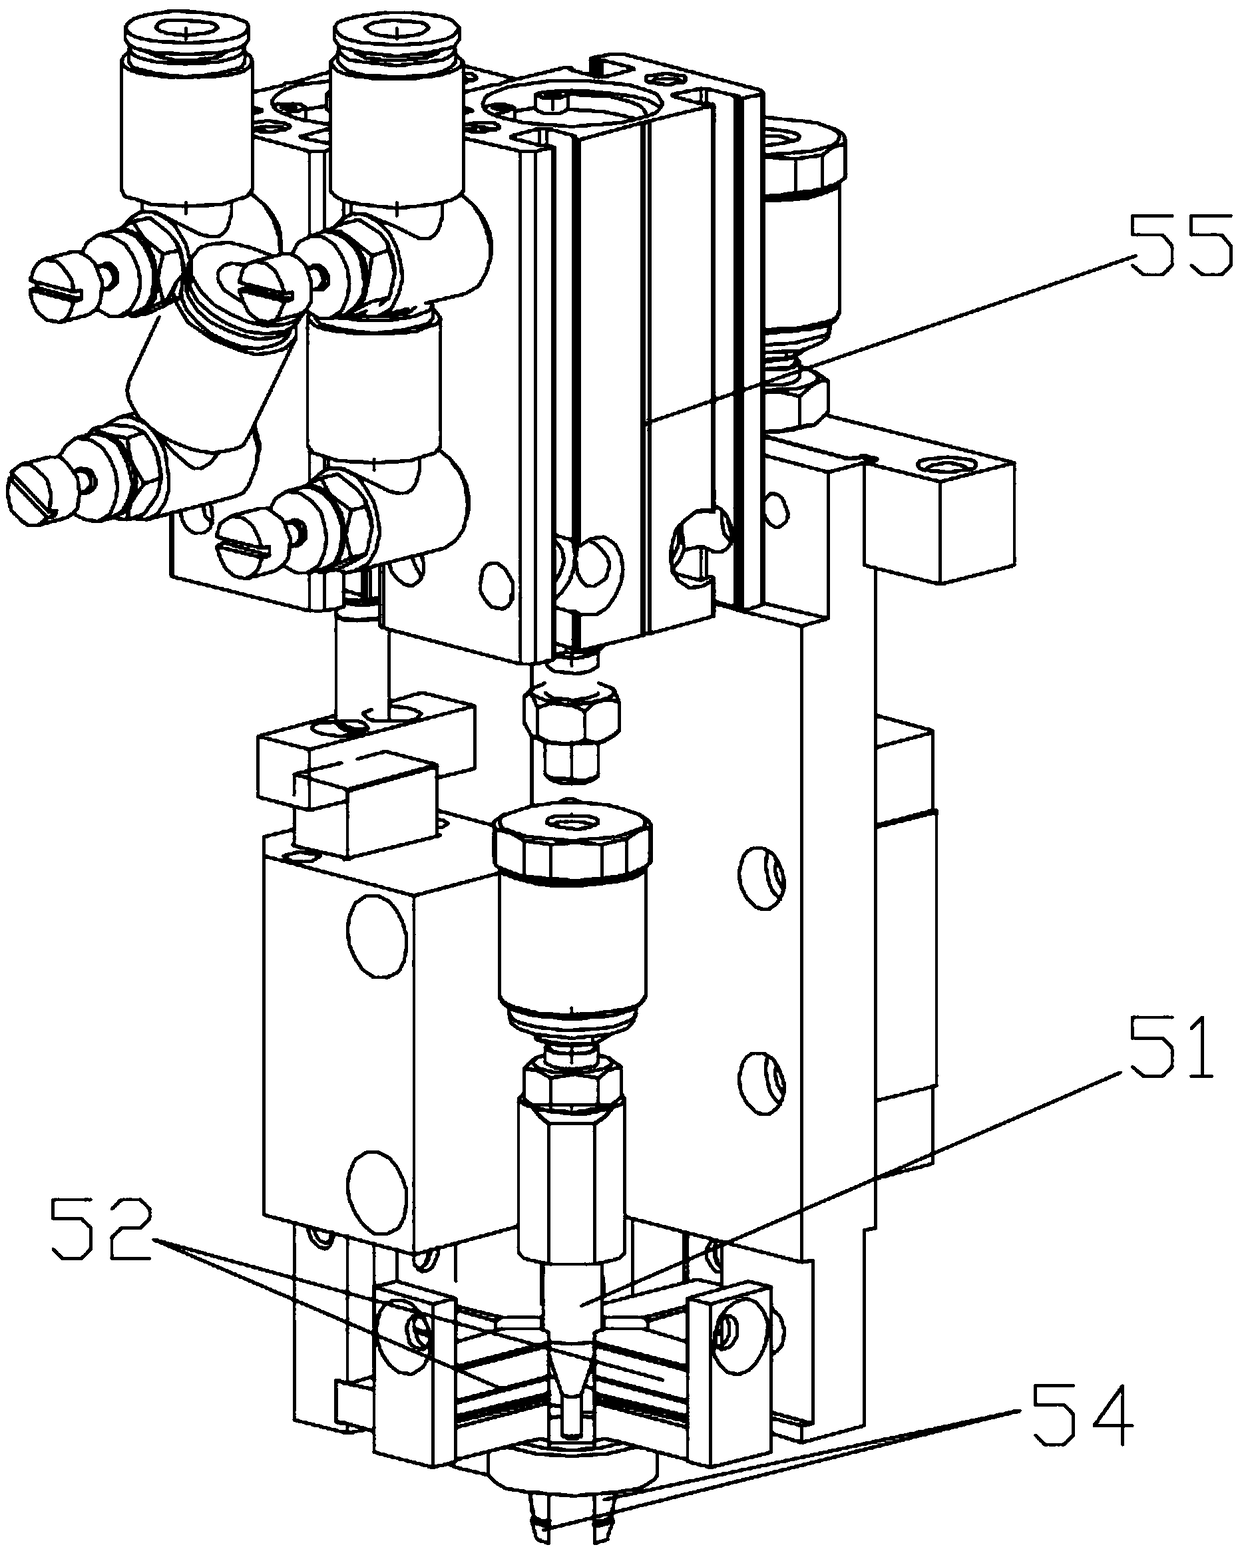 Mechanism for sleeving valve body with O-ring